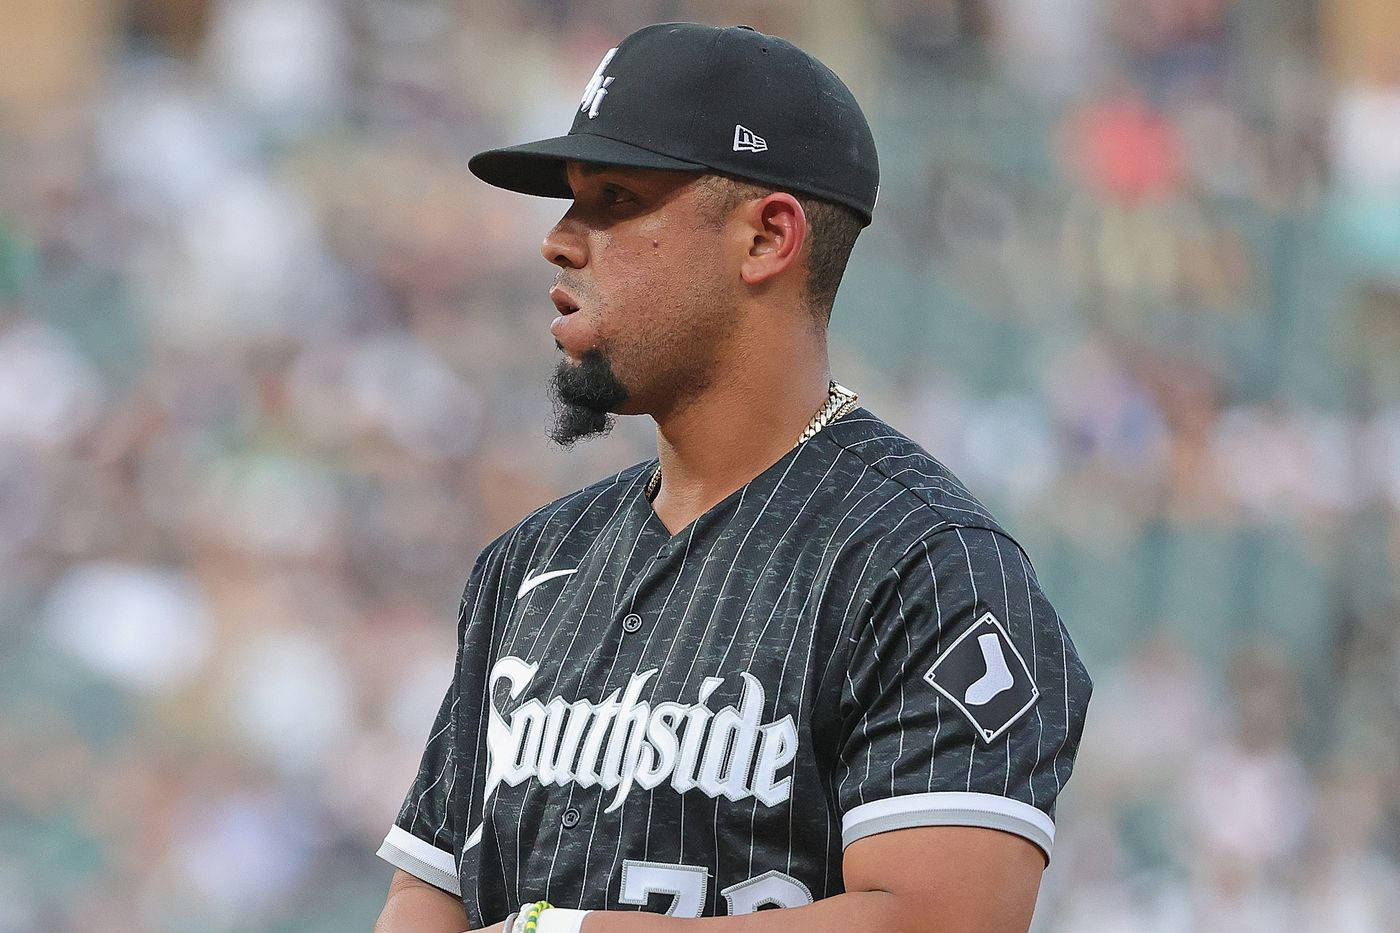 Jose Abreu Looks At The Crowd Background